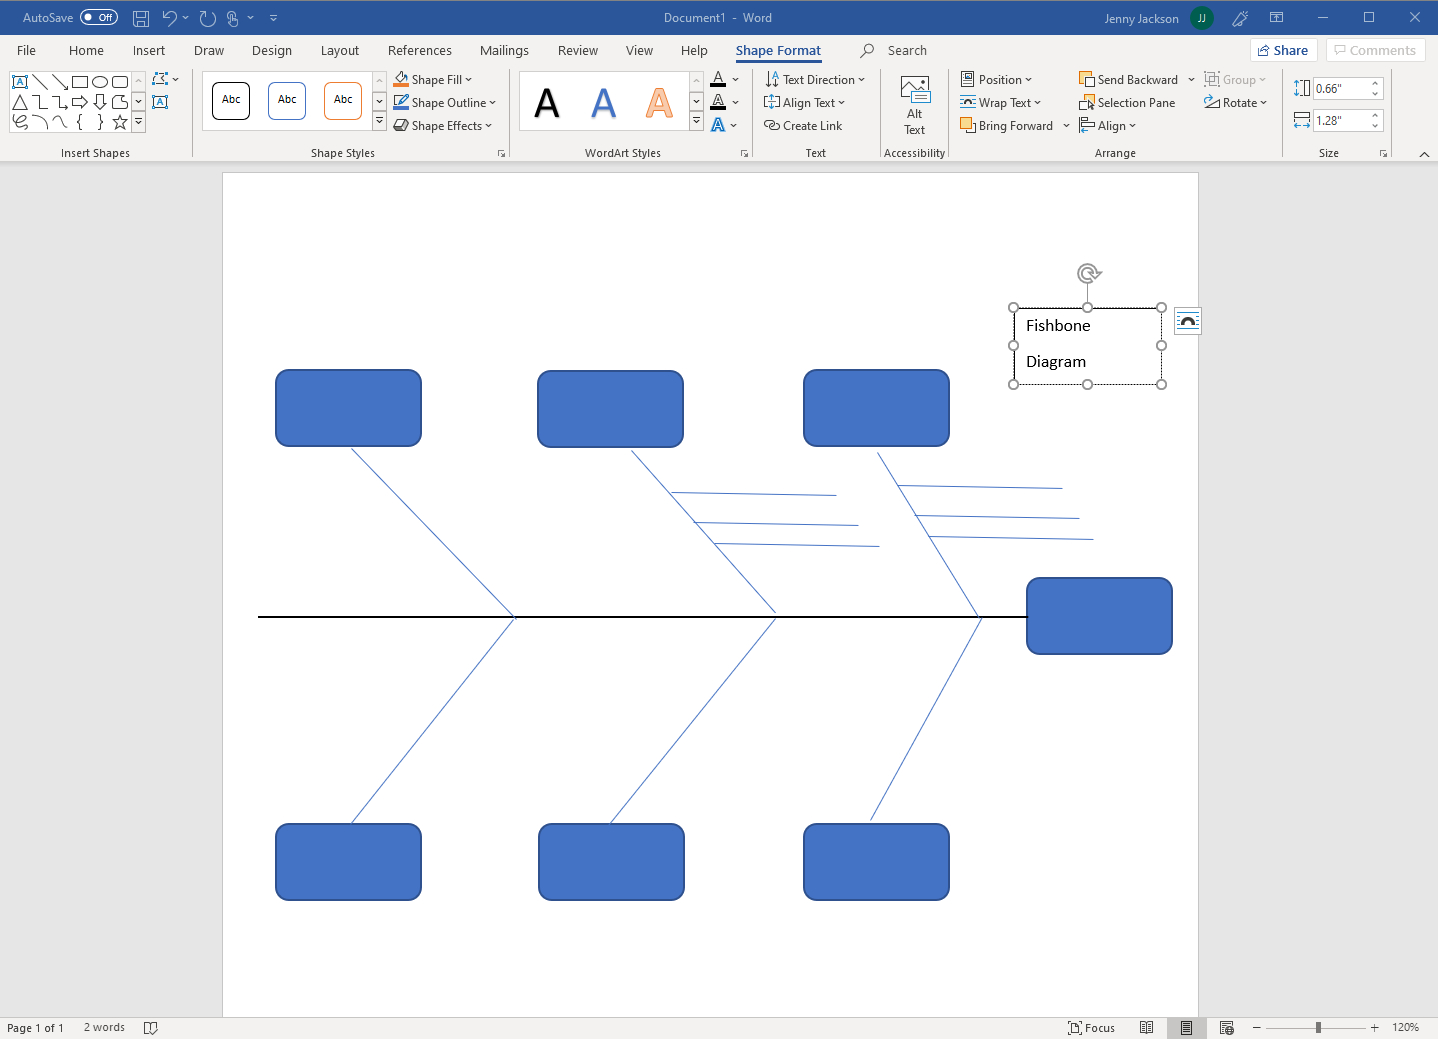 How To Make A Fishbone Diagram In Word | Lucidchart Blog With Blank Fishbone Diagram Template Word